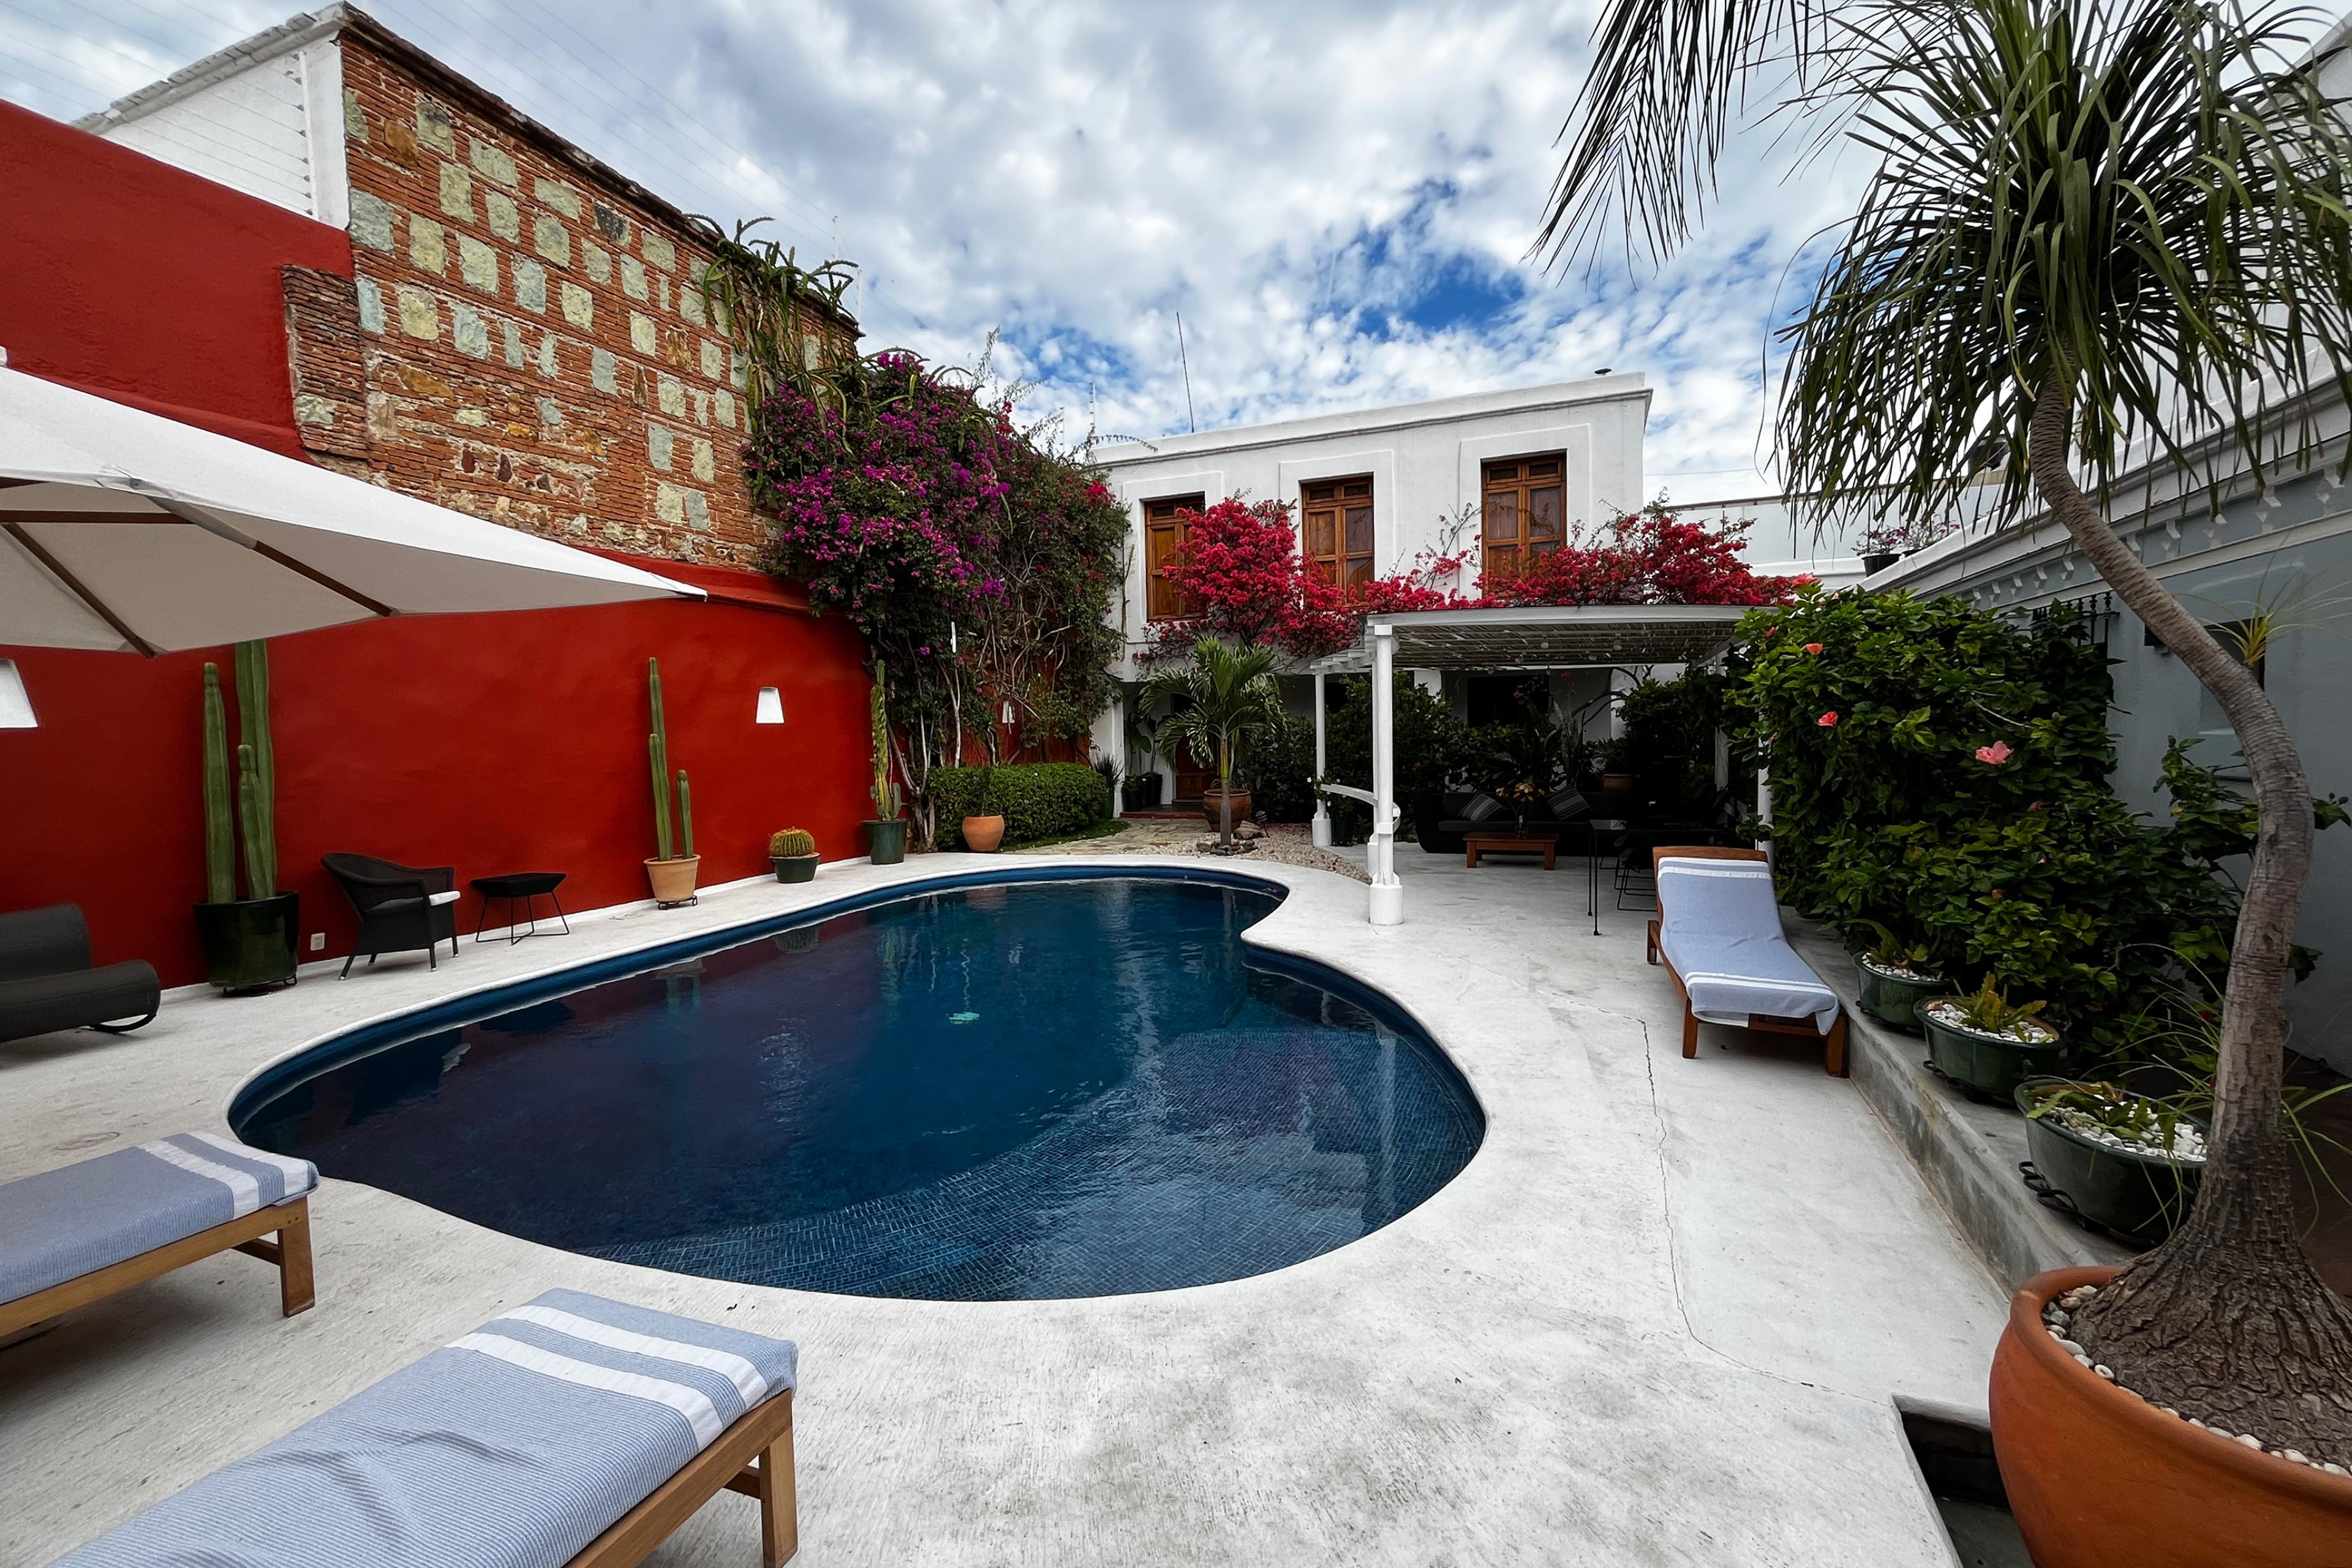 kidney pool in a patio behind a red building